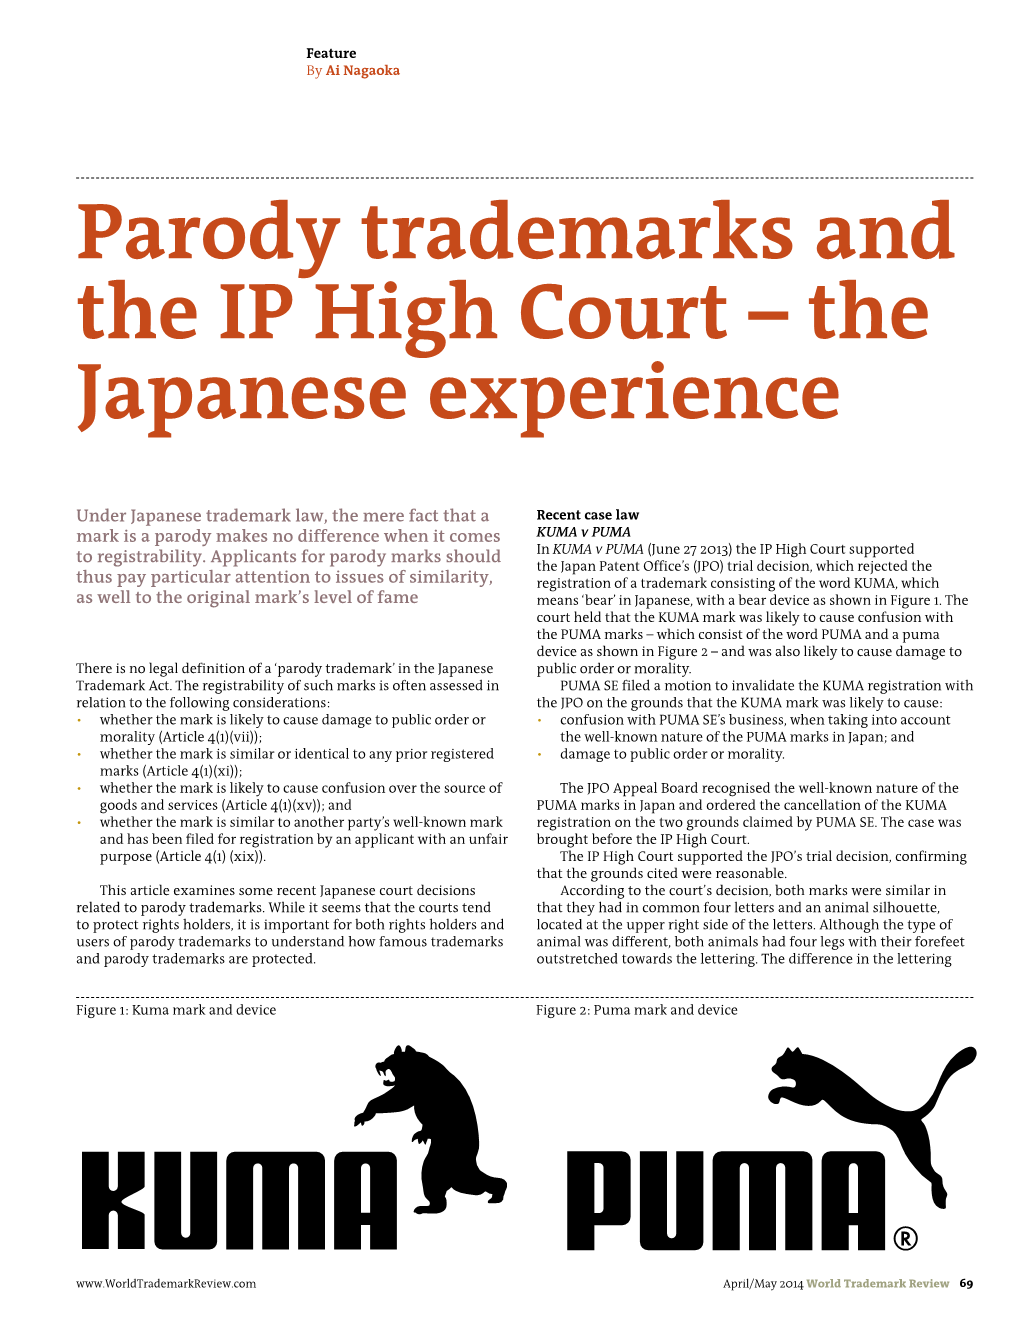 Parody Trademarks and the IP High Court – the Japanese Experience